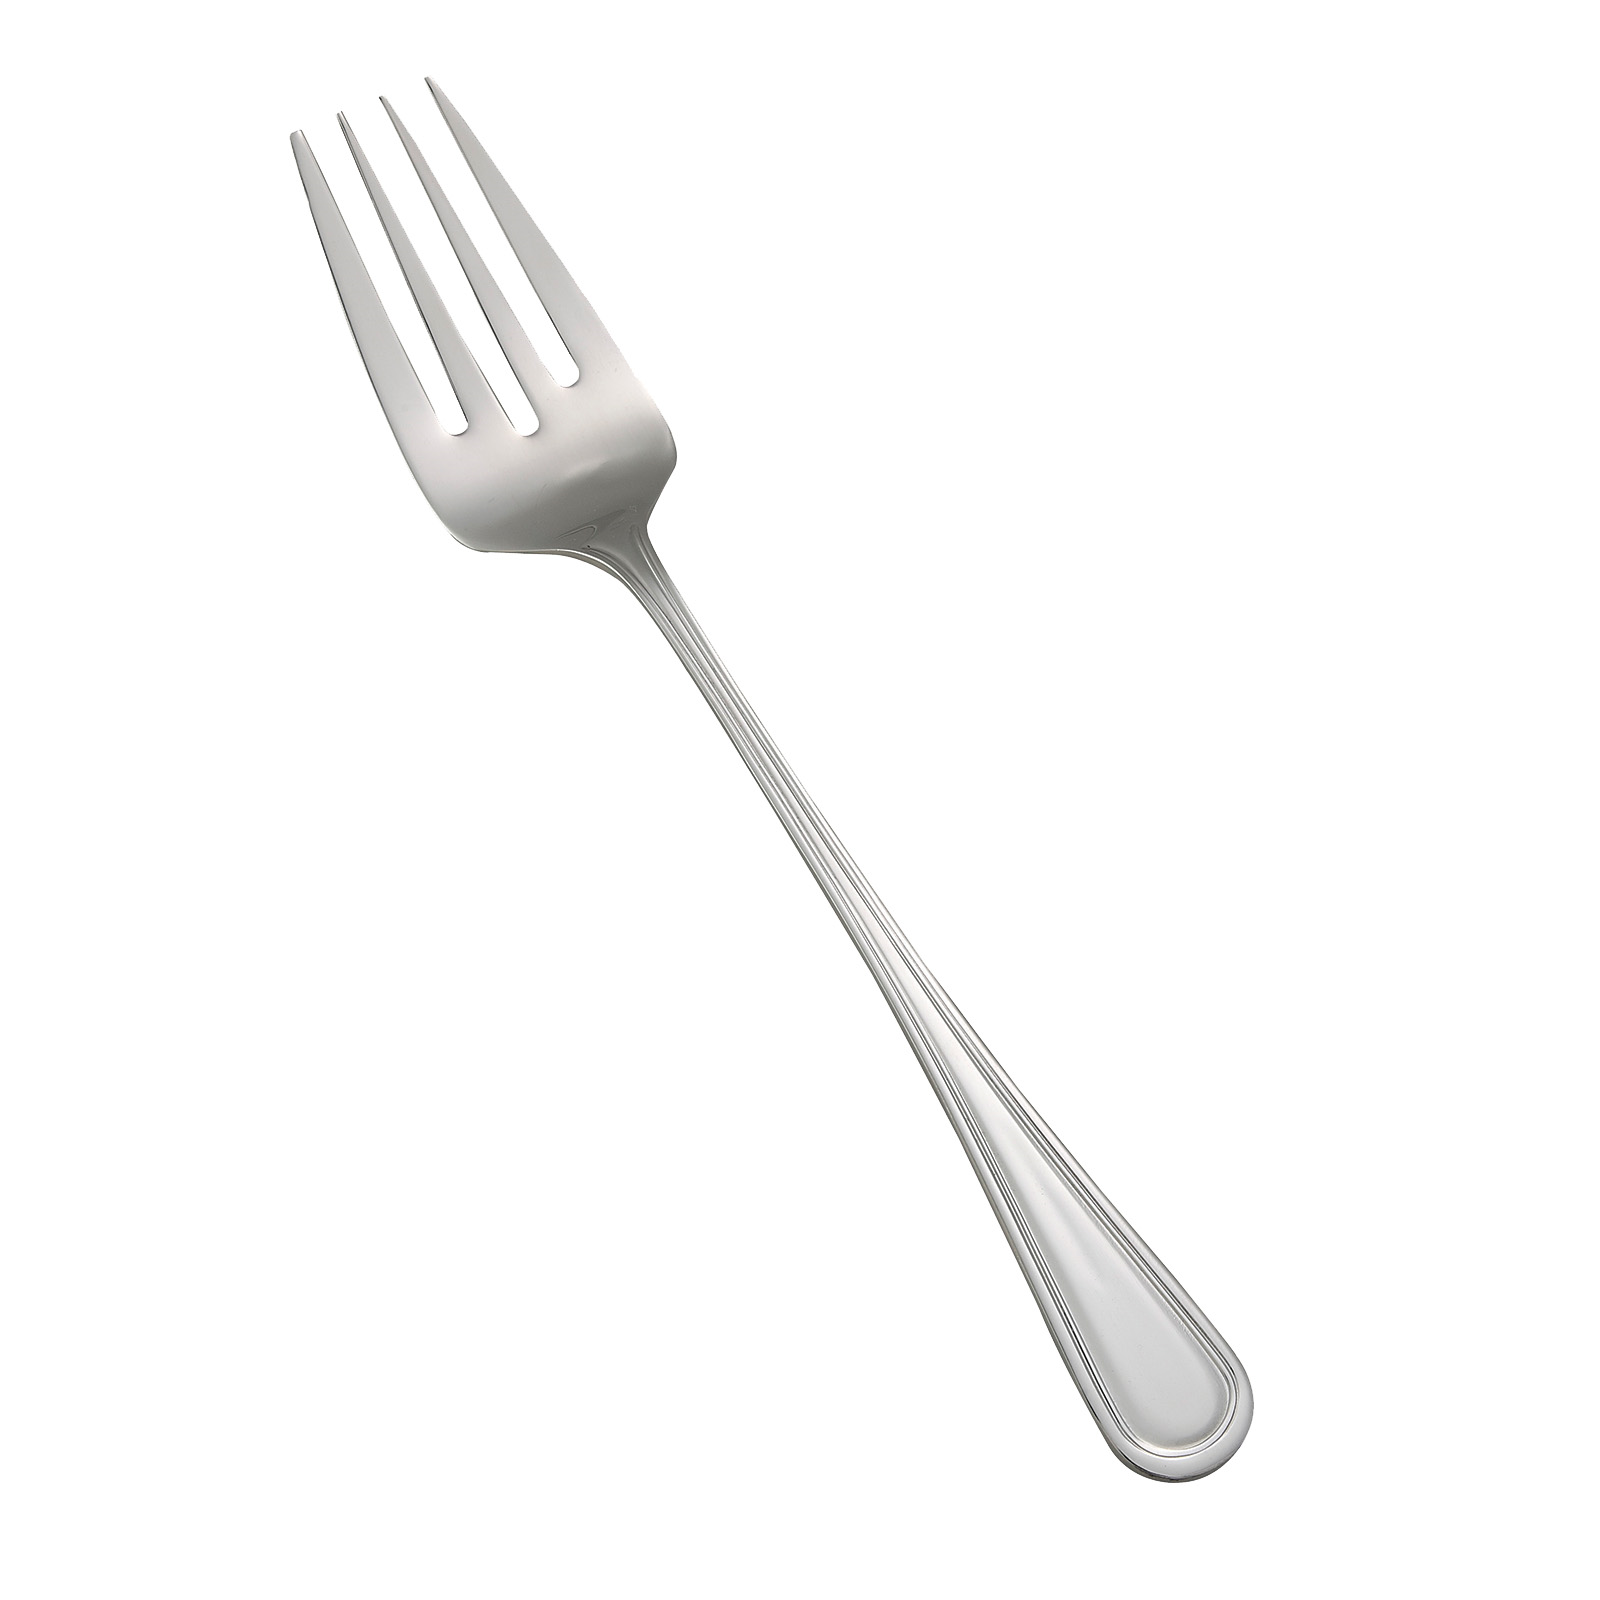 Winco 0030-25 Banquet Serving Fork 12", Stainless Steel, Extra Heavy Weight, Shangarila Style